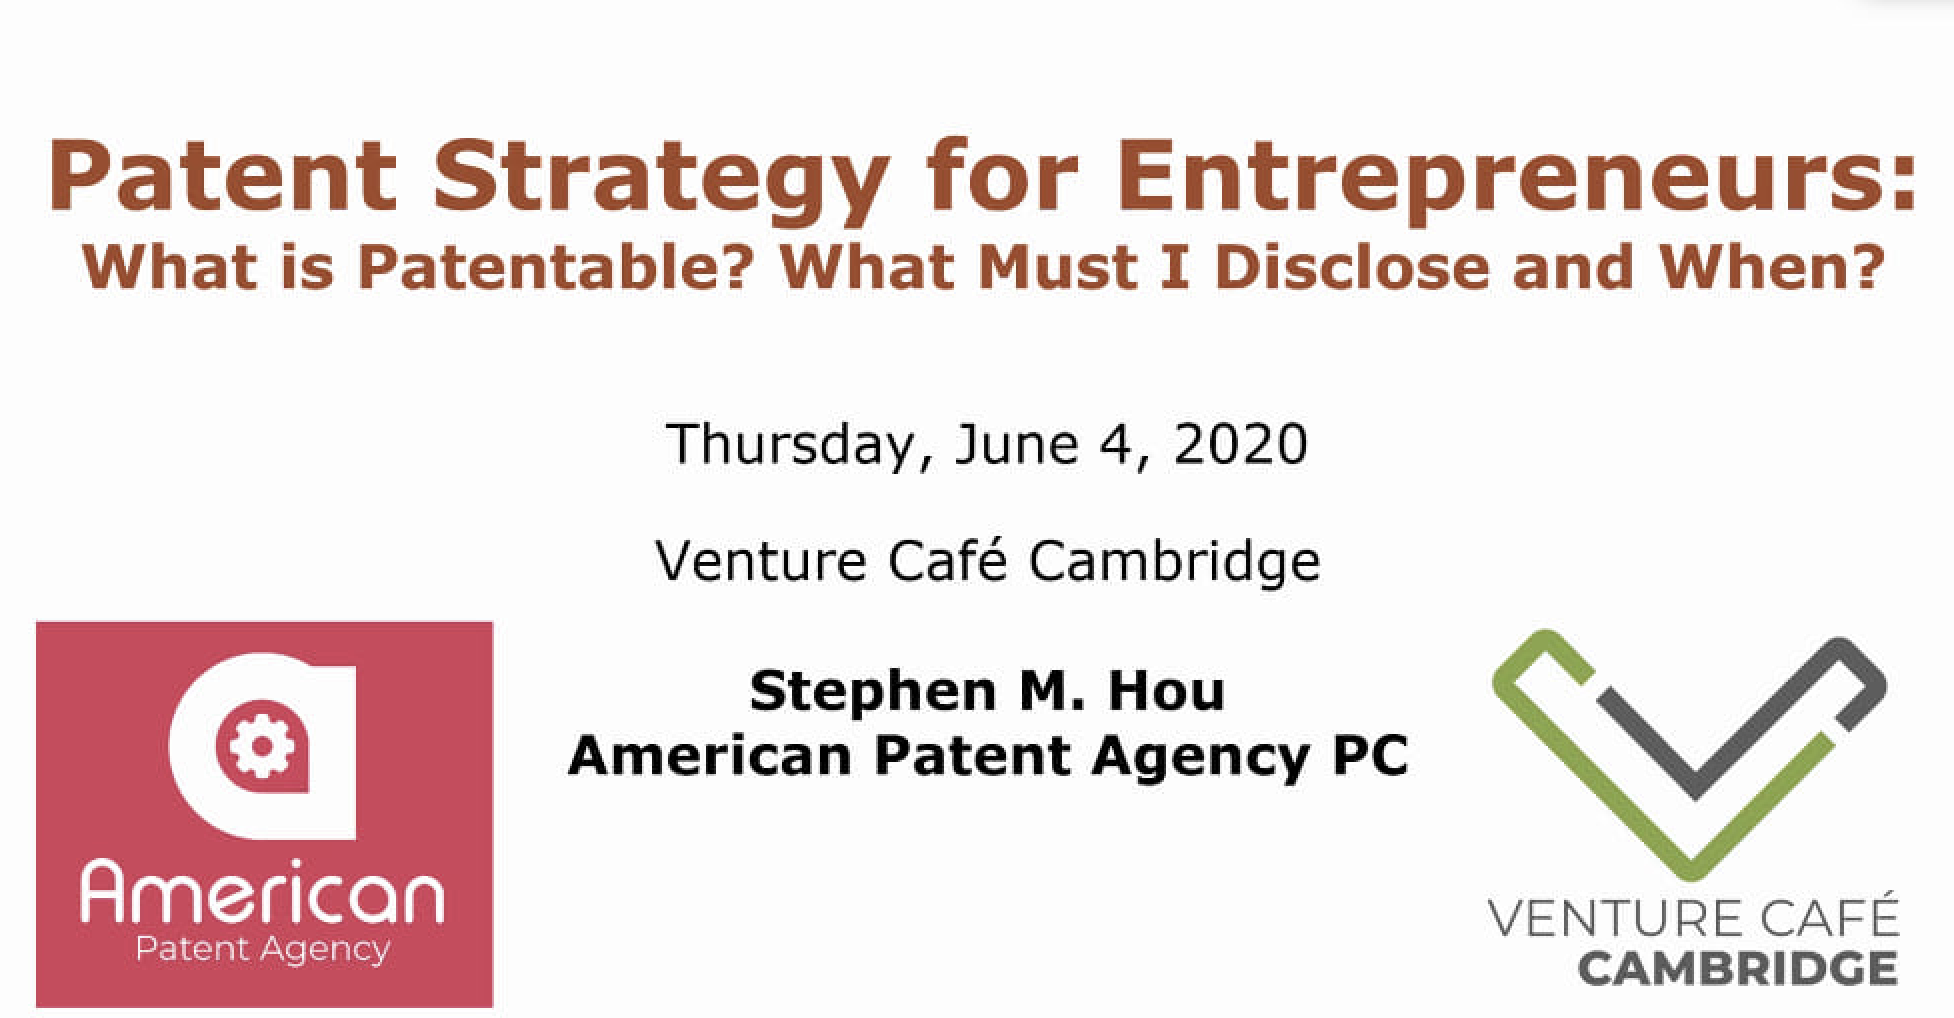 Patent Strategies for Entrepreneurs: What is Patentable? What Must I Disclose and When?